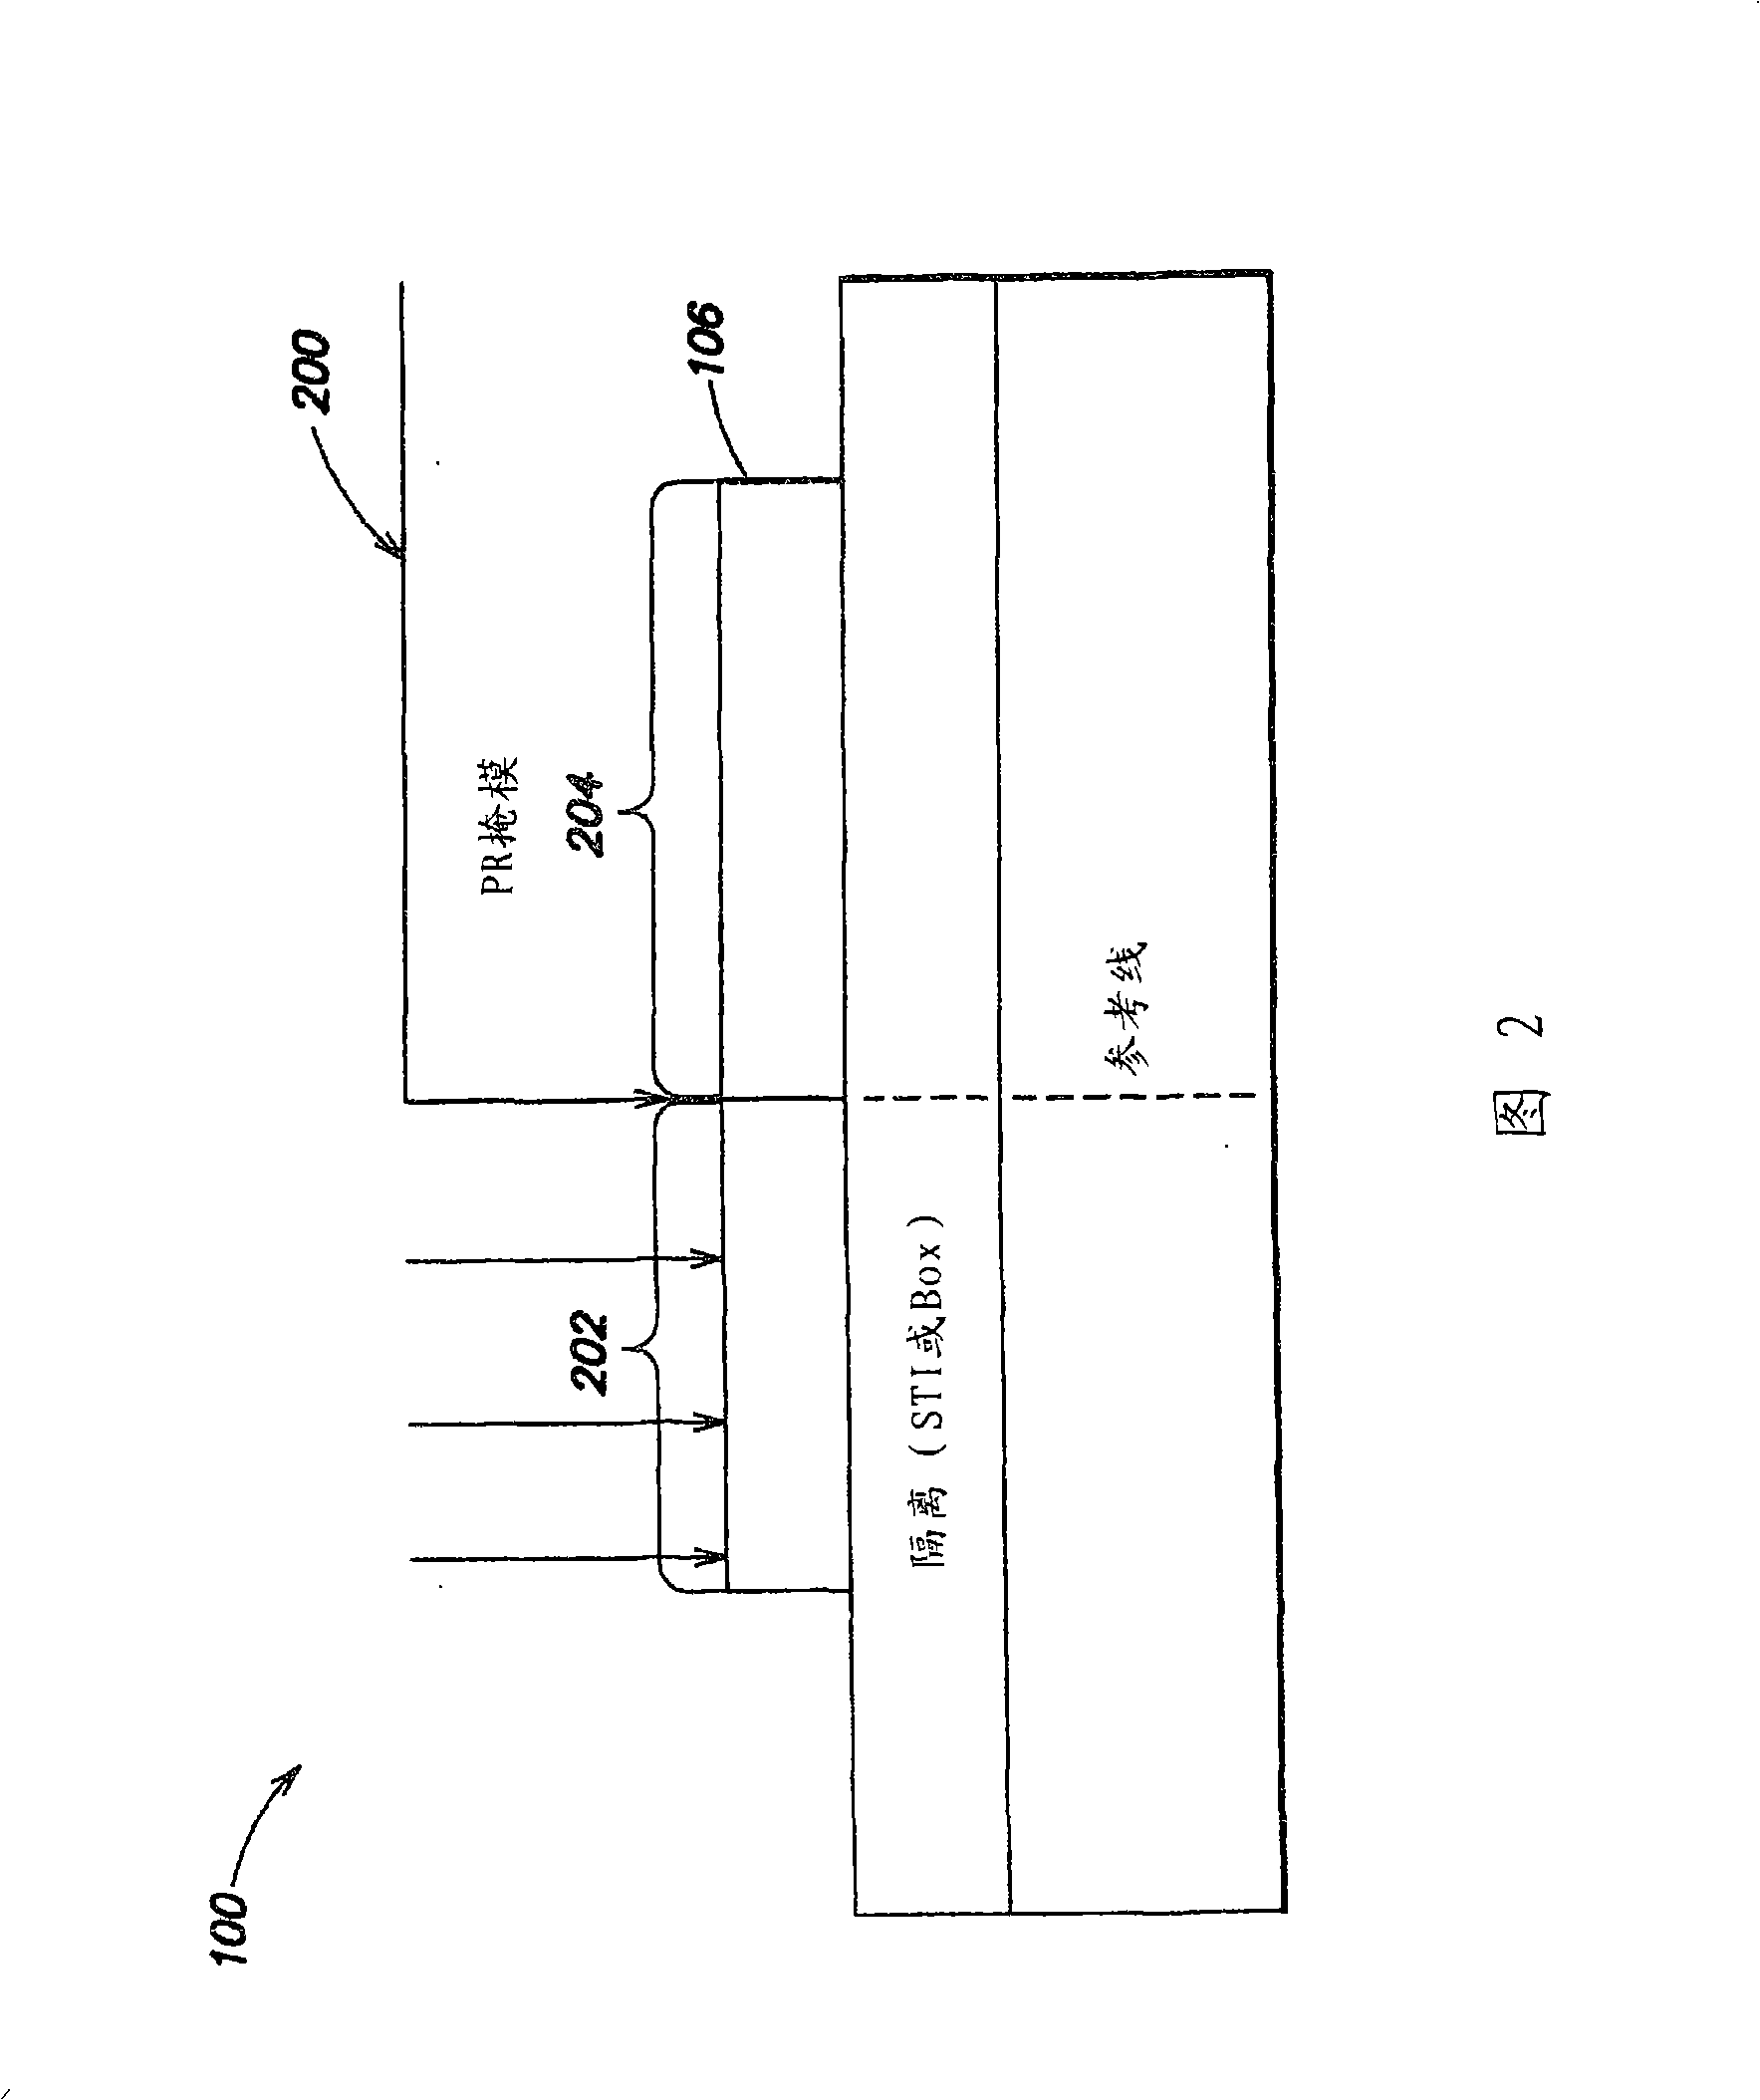 Electrically programmable fuse